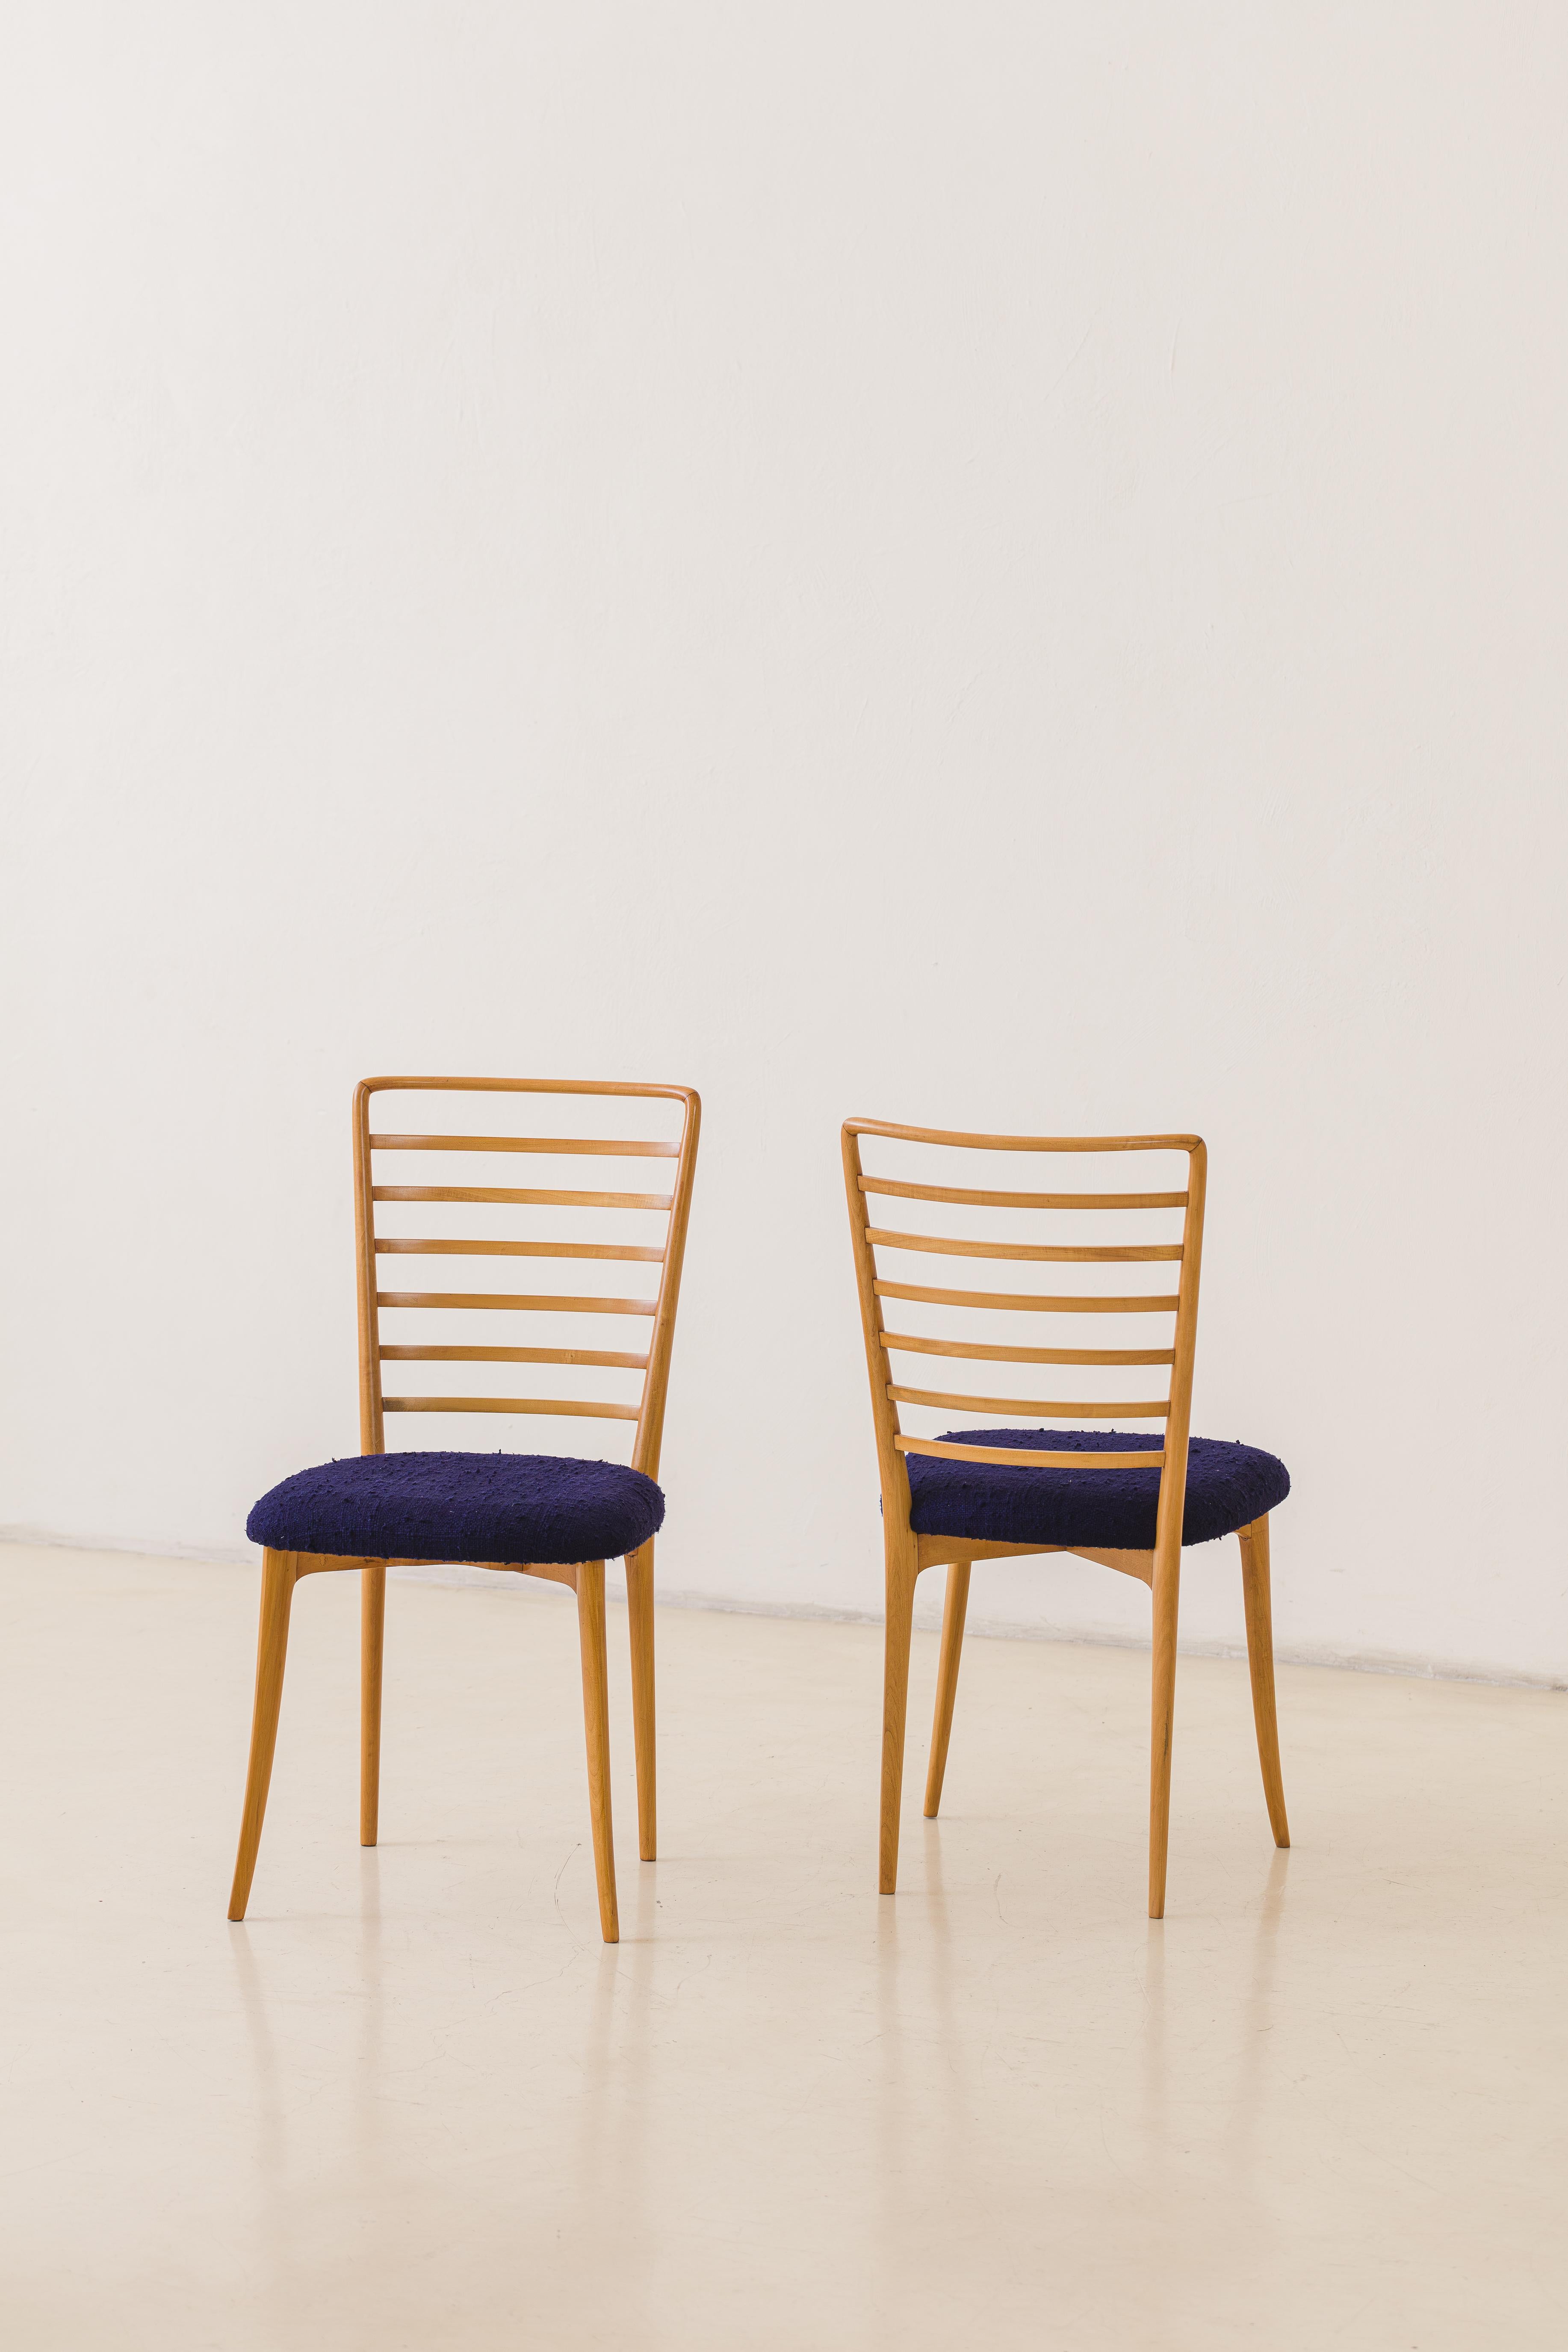 Mid-20th Century Joaquim Tenreiro Dining Chairs, Solid Wood and Fabric, MidCentury, Brazil, 1950s For Sale